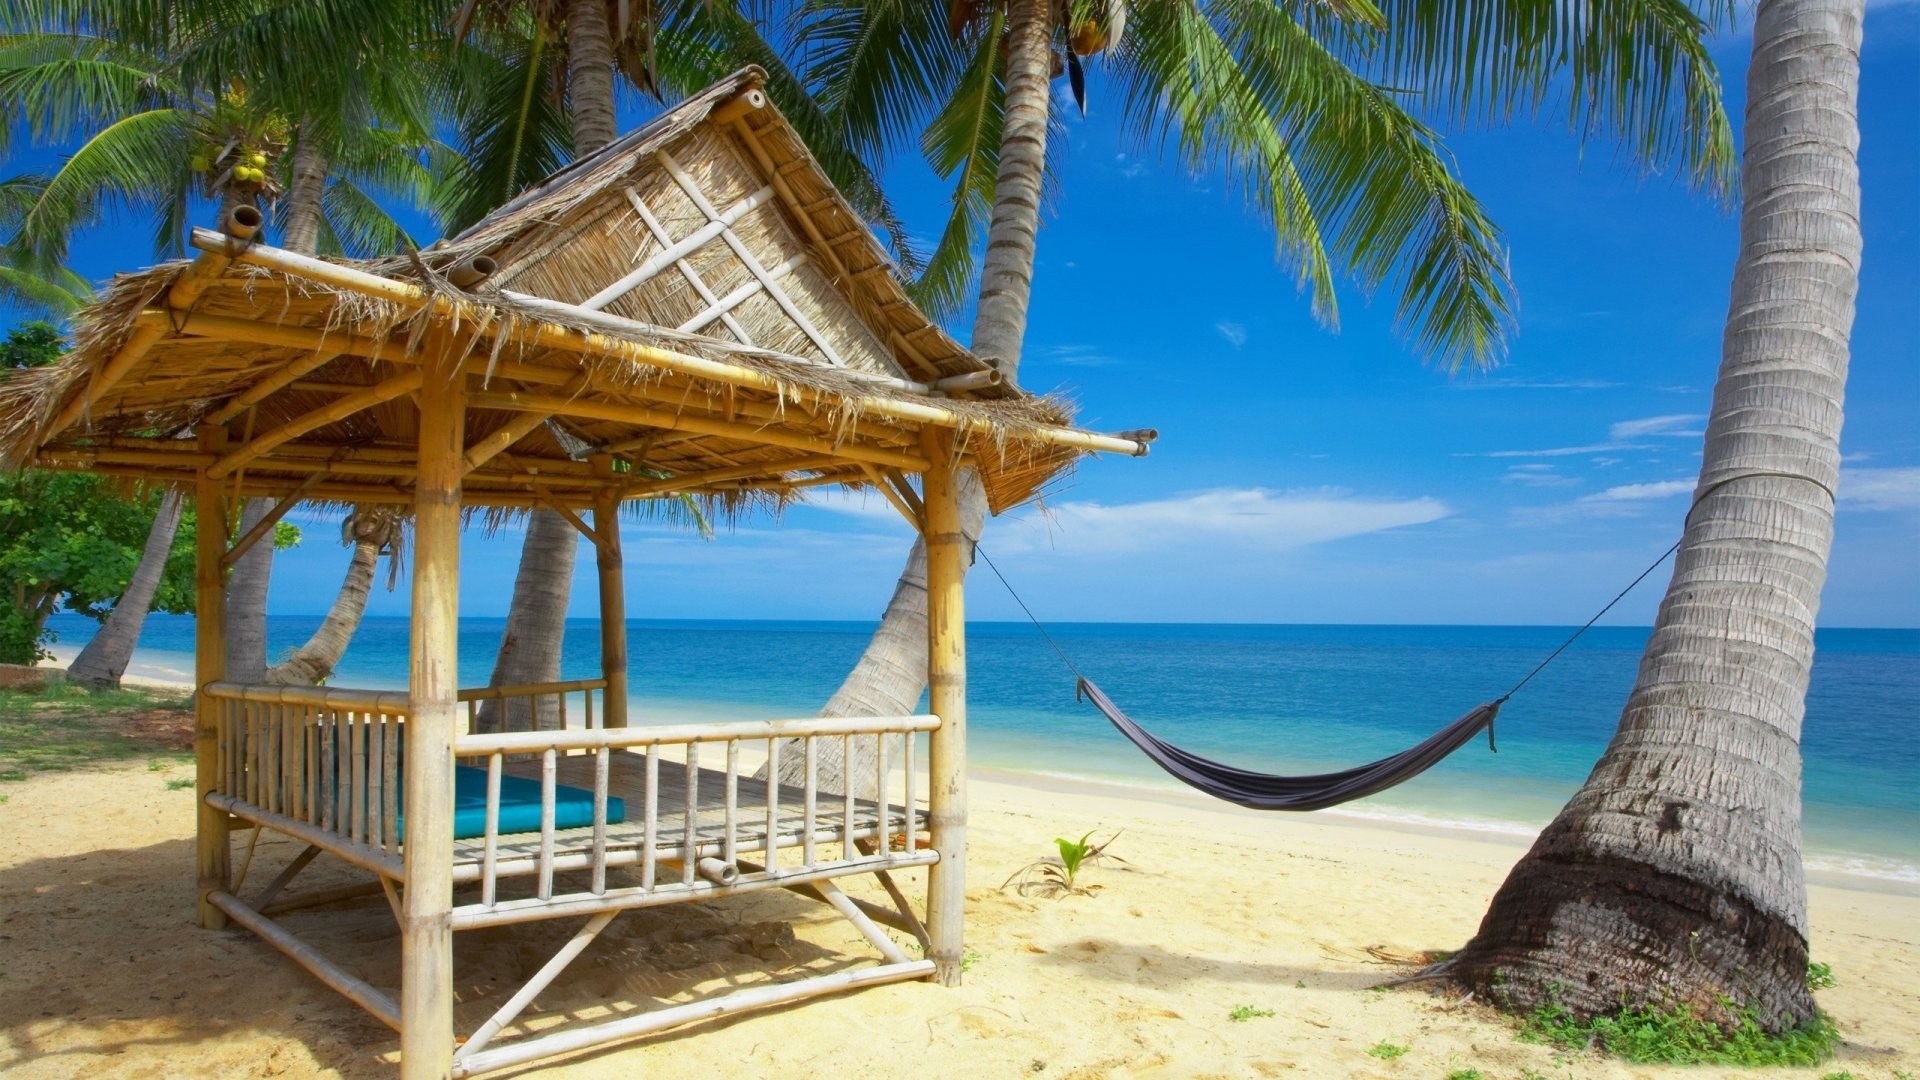 Free Beach Screensavers And Wallpapers Beach Hut photos Refresh Your